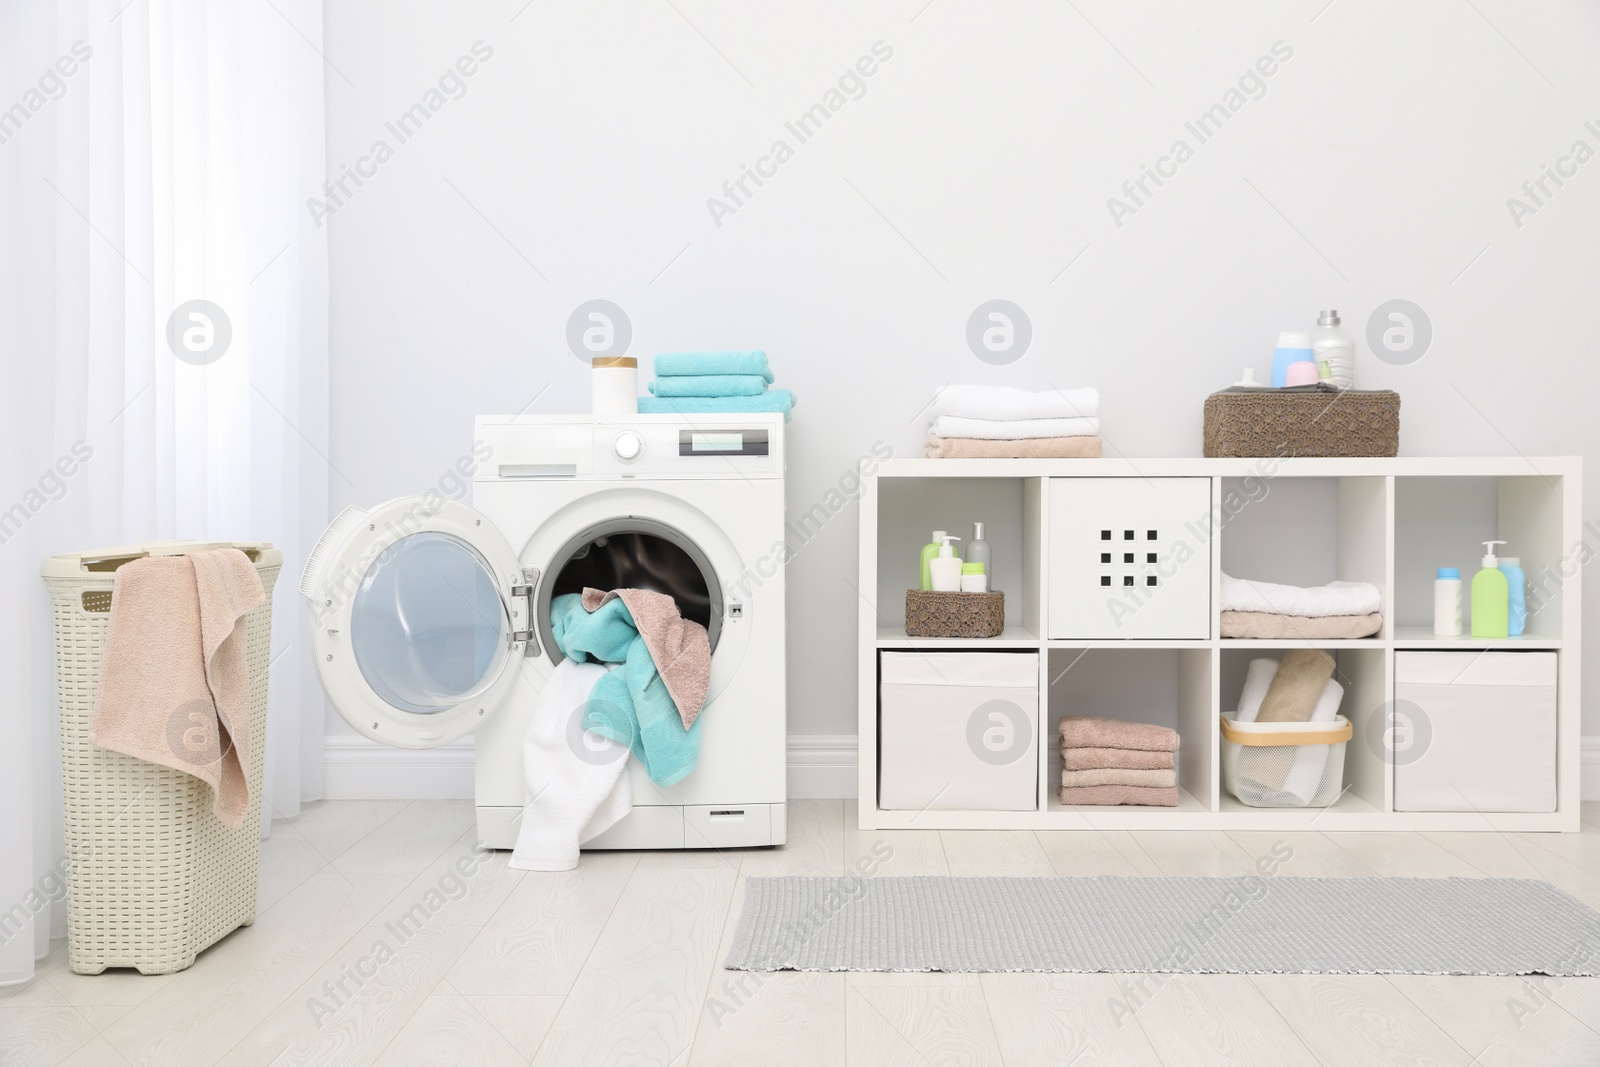 Photo of Bathroom interior with towels and washing machine